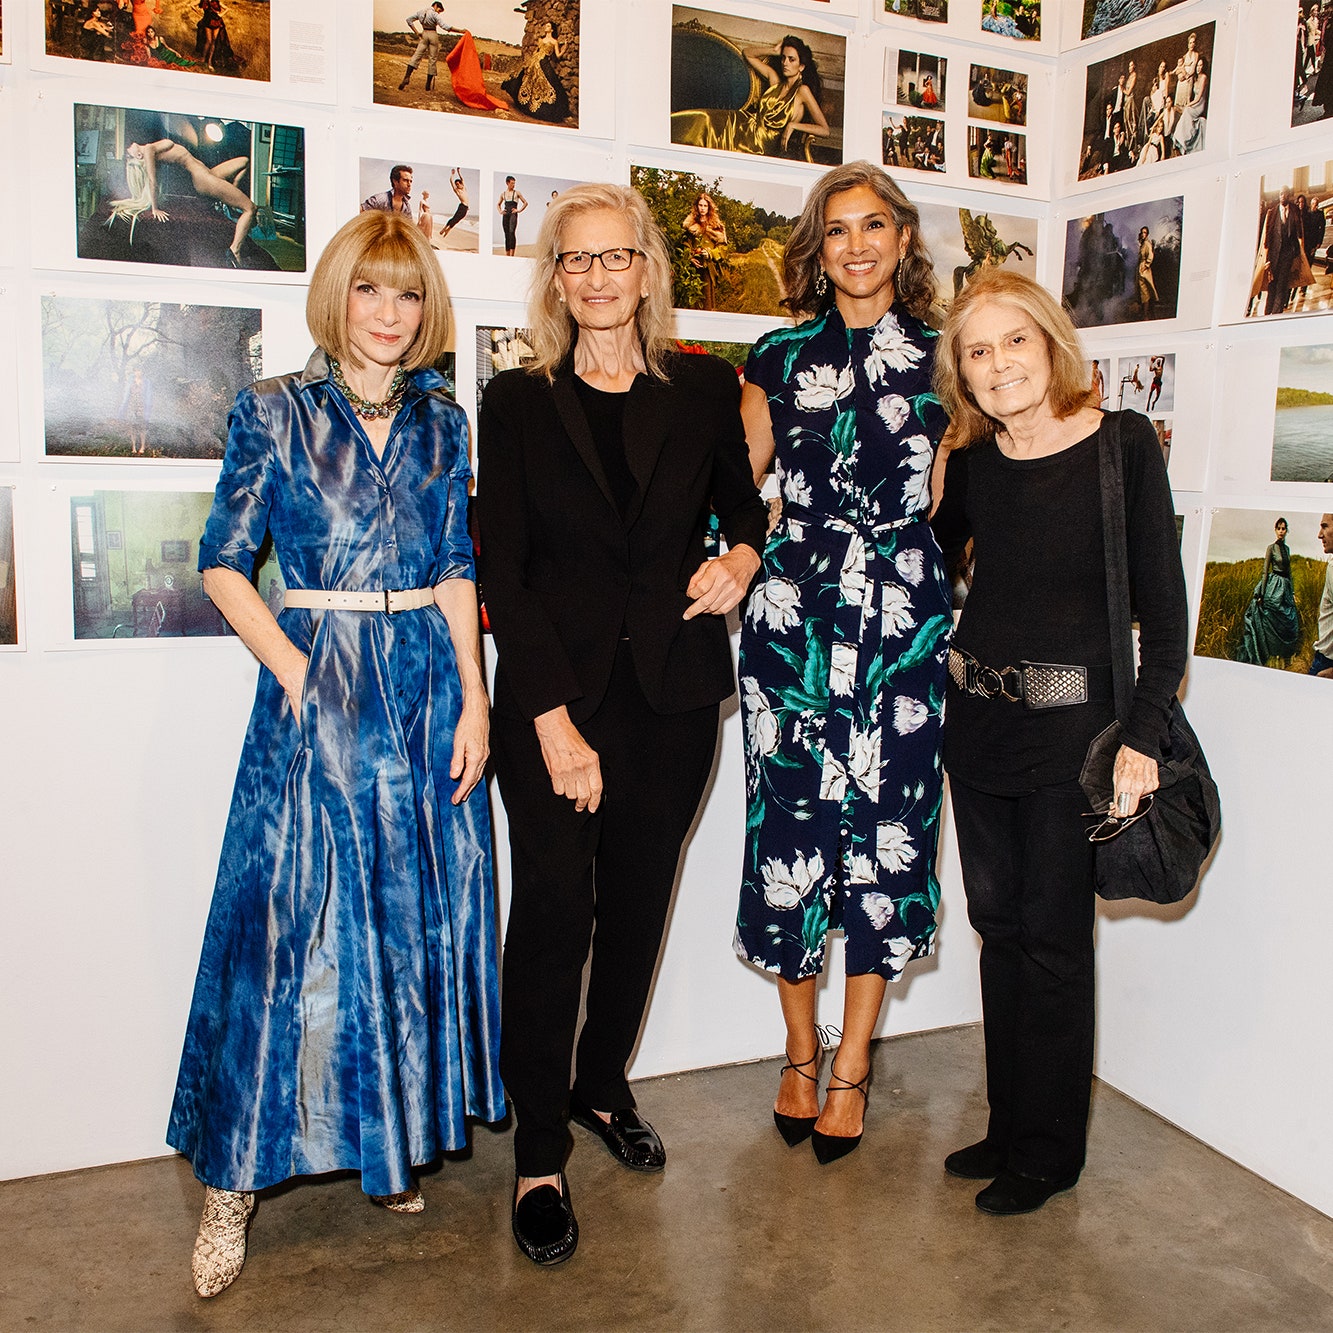 Celebrating a new annie leibovitz photo book and exhibit with friendsâand a few subjects vanity fair